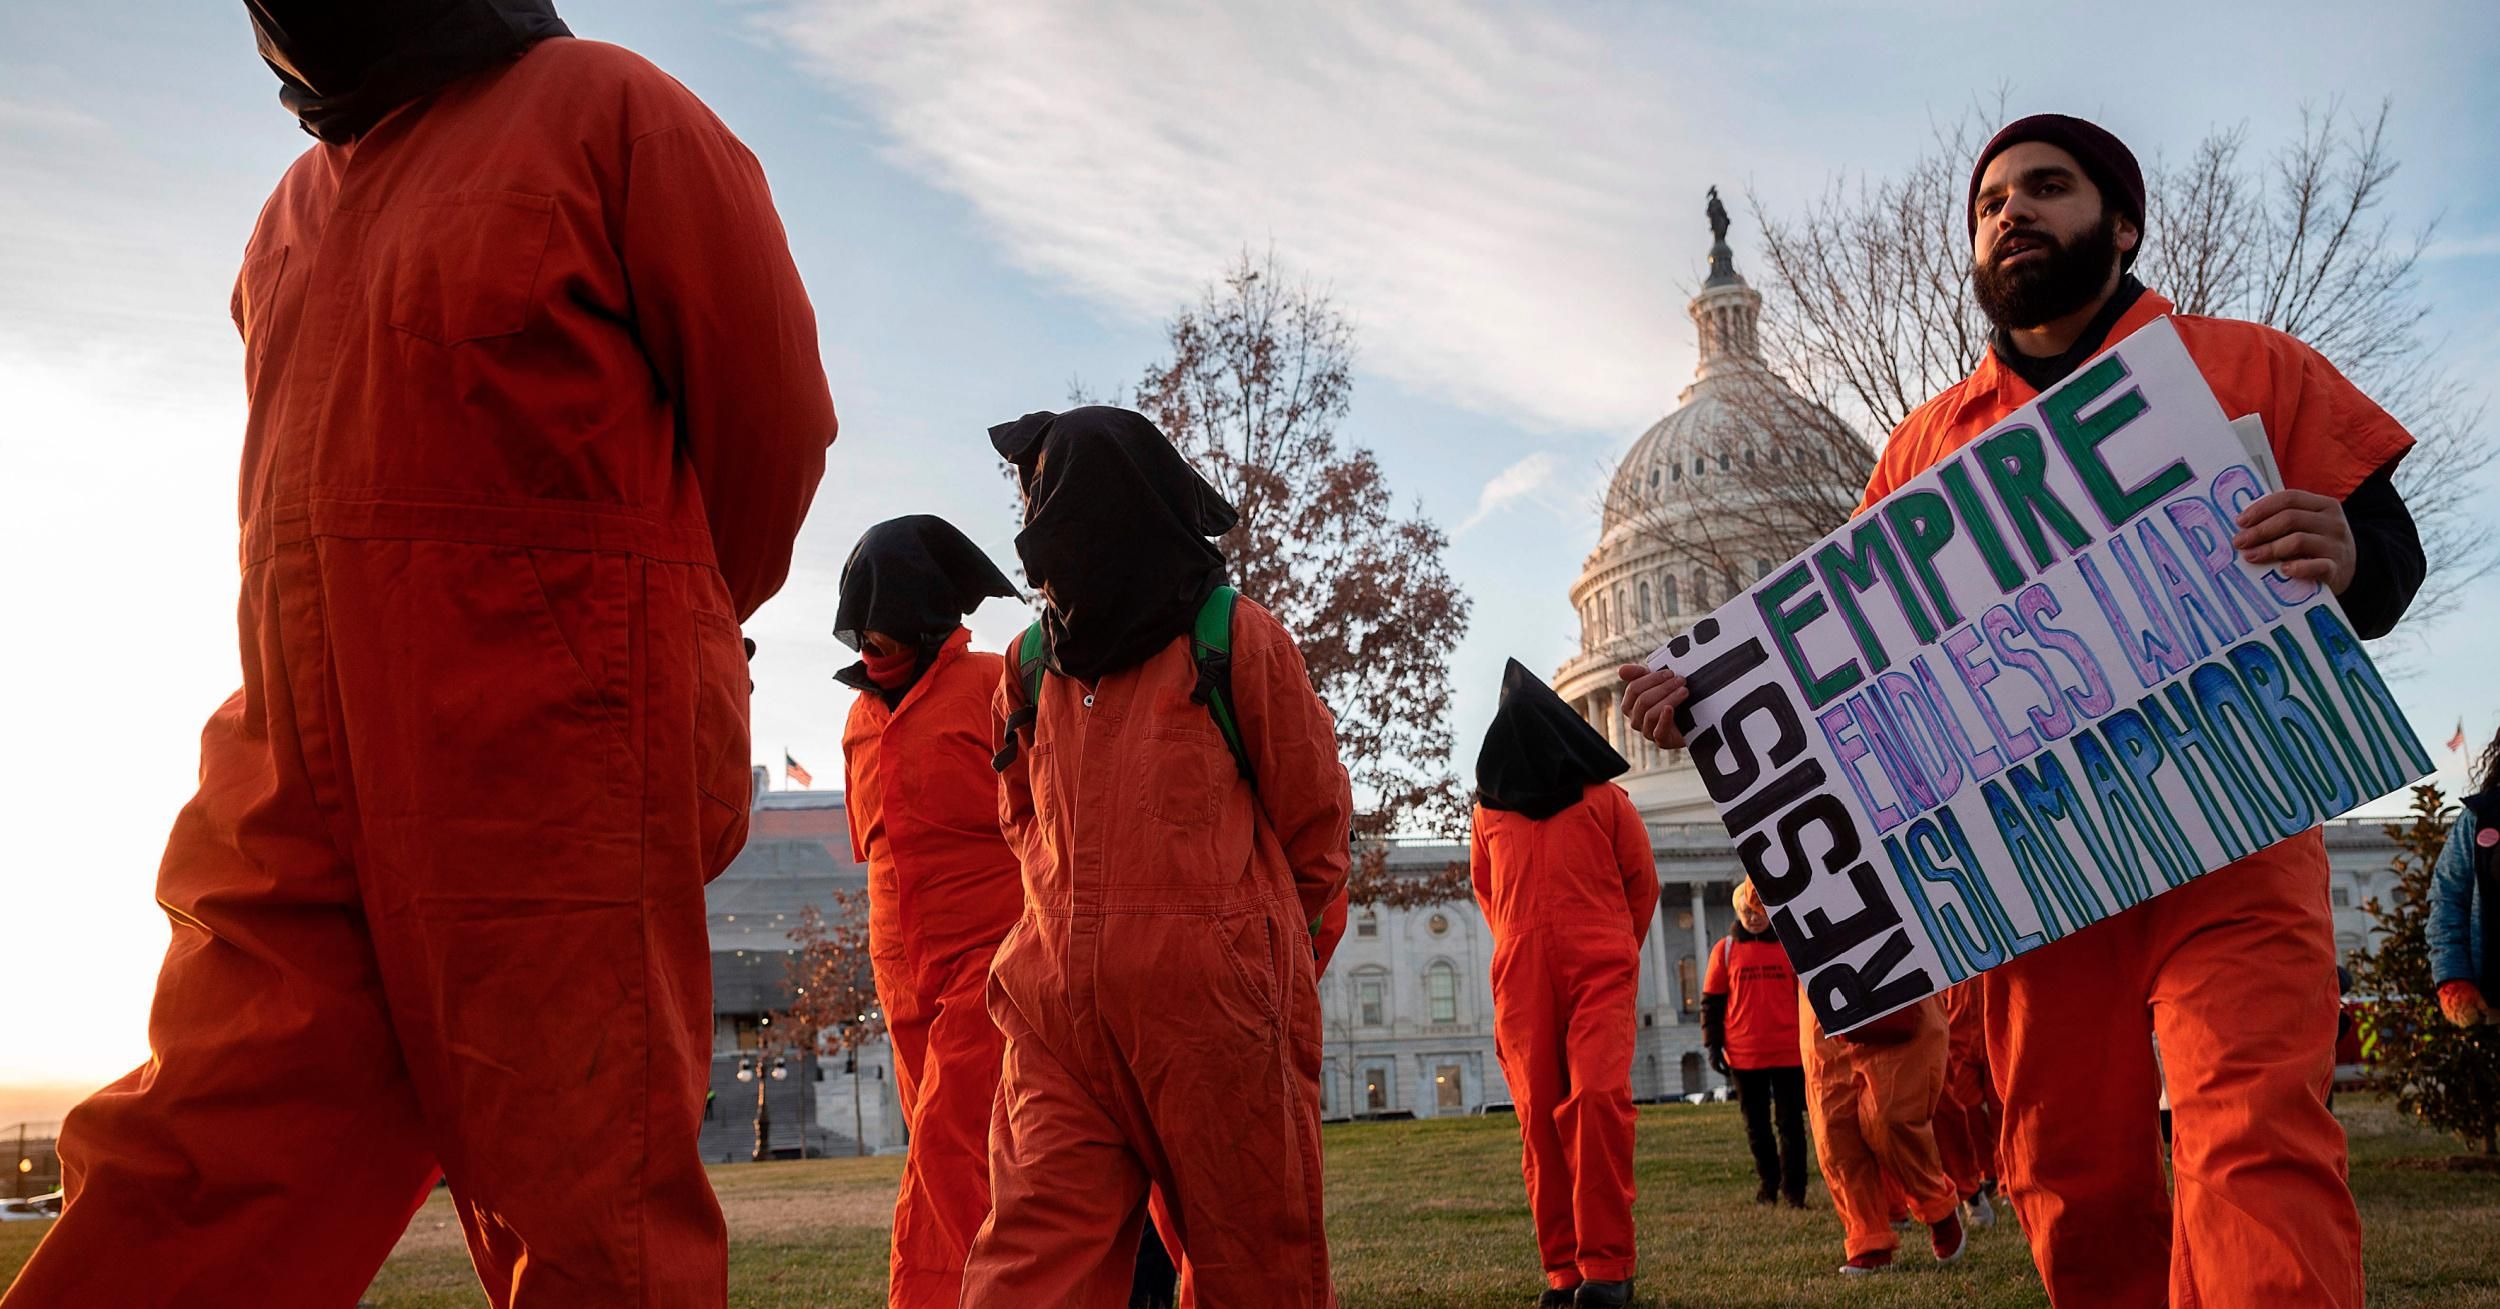 Demonstrators dressed in Guantánamo Bay prisoner uniforms march past Capitol Hill in Washington, D.C., on January 9, 2020. (Photo: Jim Watson/AFP via Getty Images)